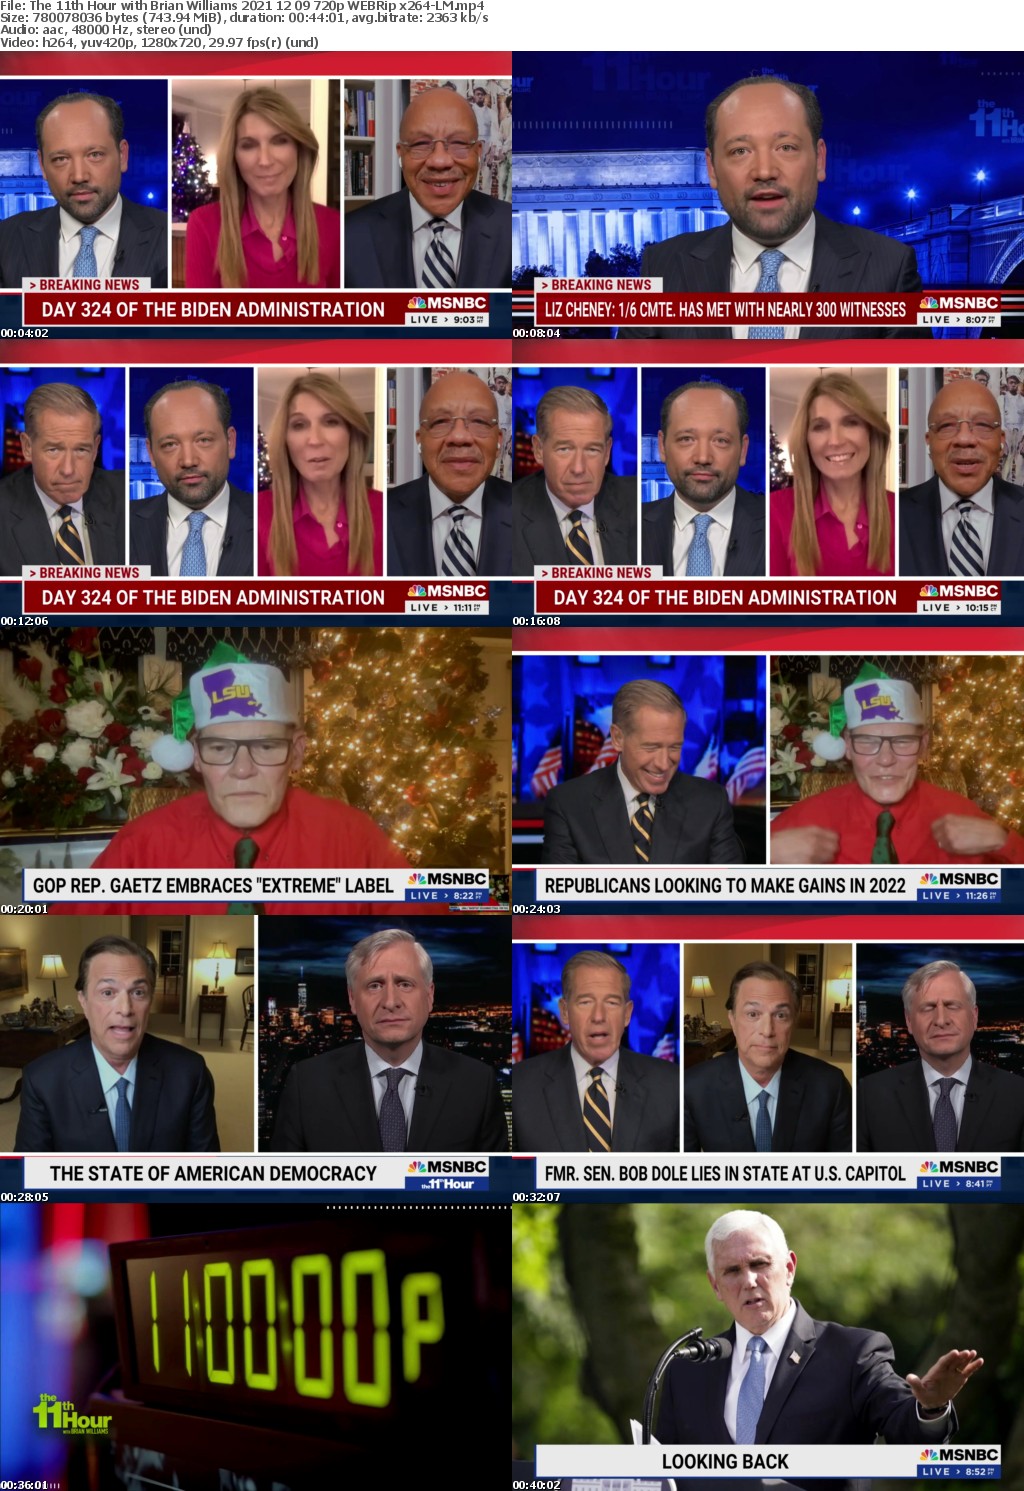 The 11th Hour with Brian Williams 2021 12 09 720p WEBRip x264-LM